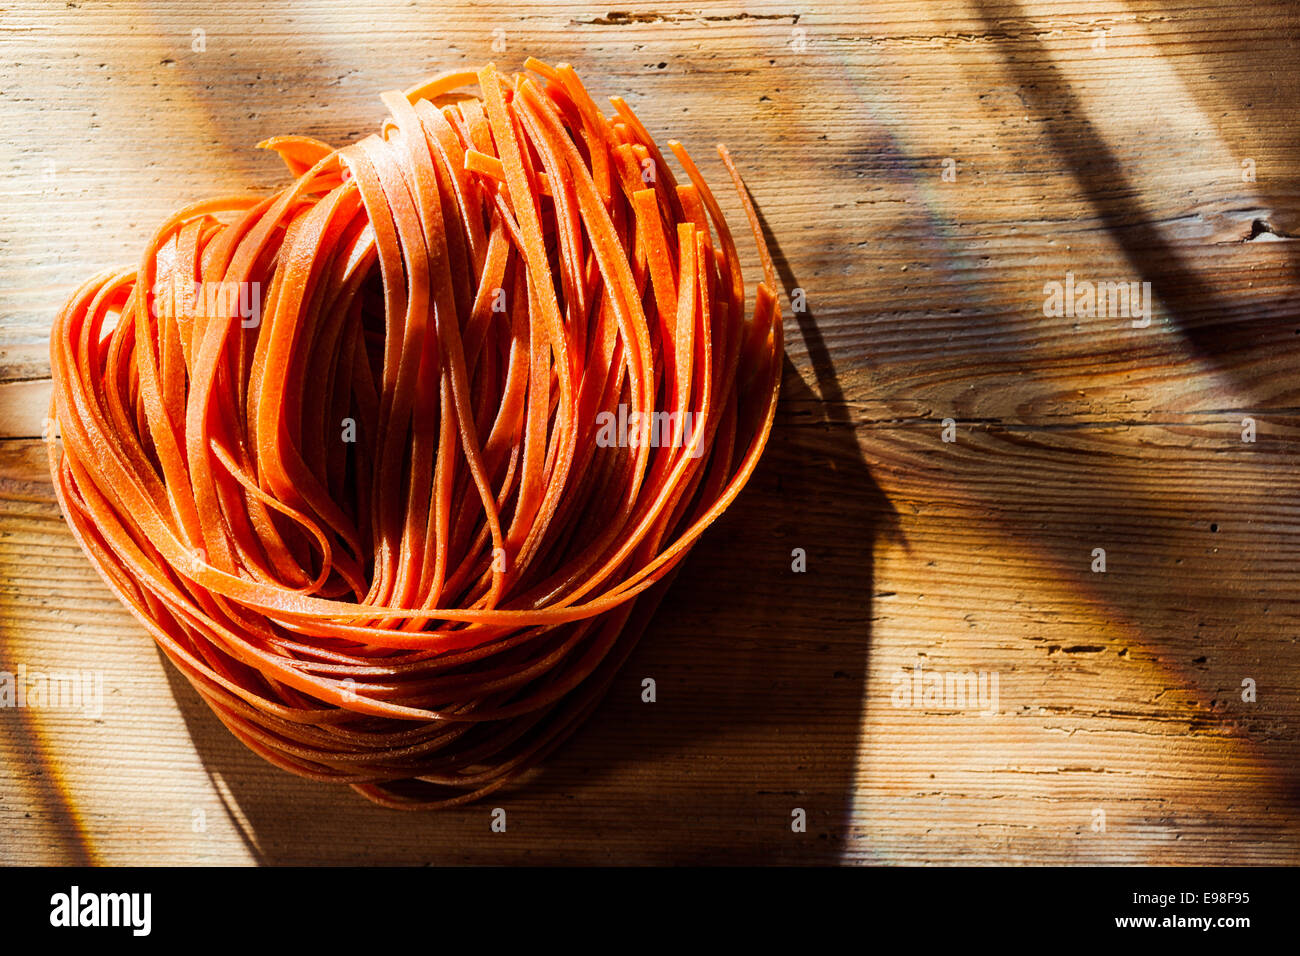 Tomato flavoured Italian tagliatelli or linguine pasta standing ready to be added to a savory pasta dish on an old wooden kitchen counter in dappled sunlight Stock Photo